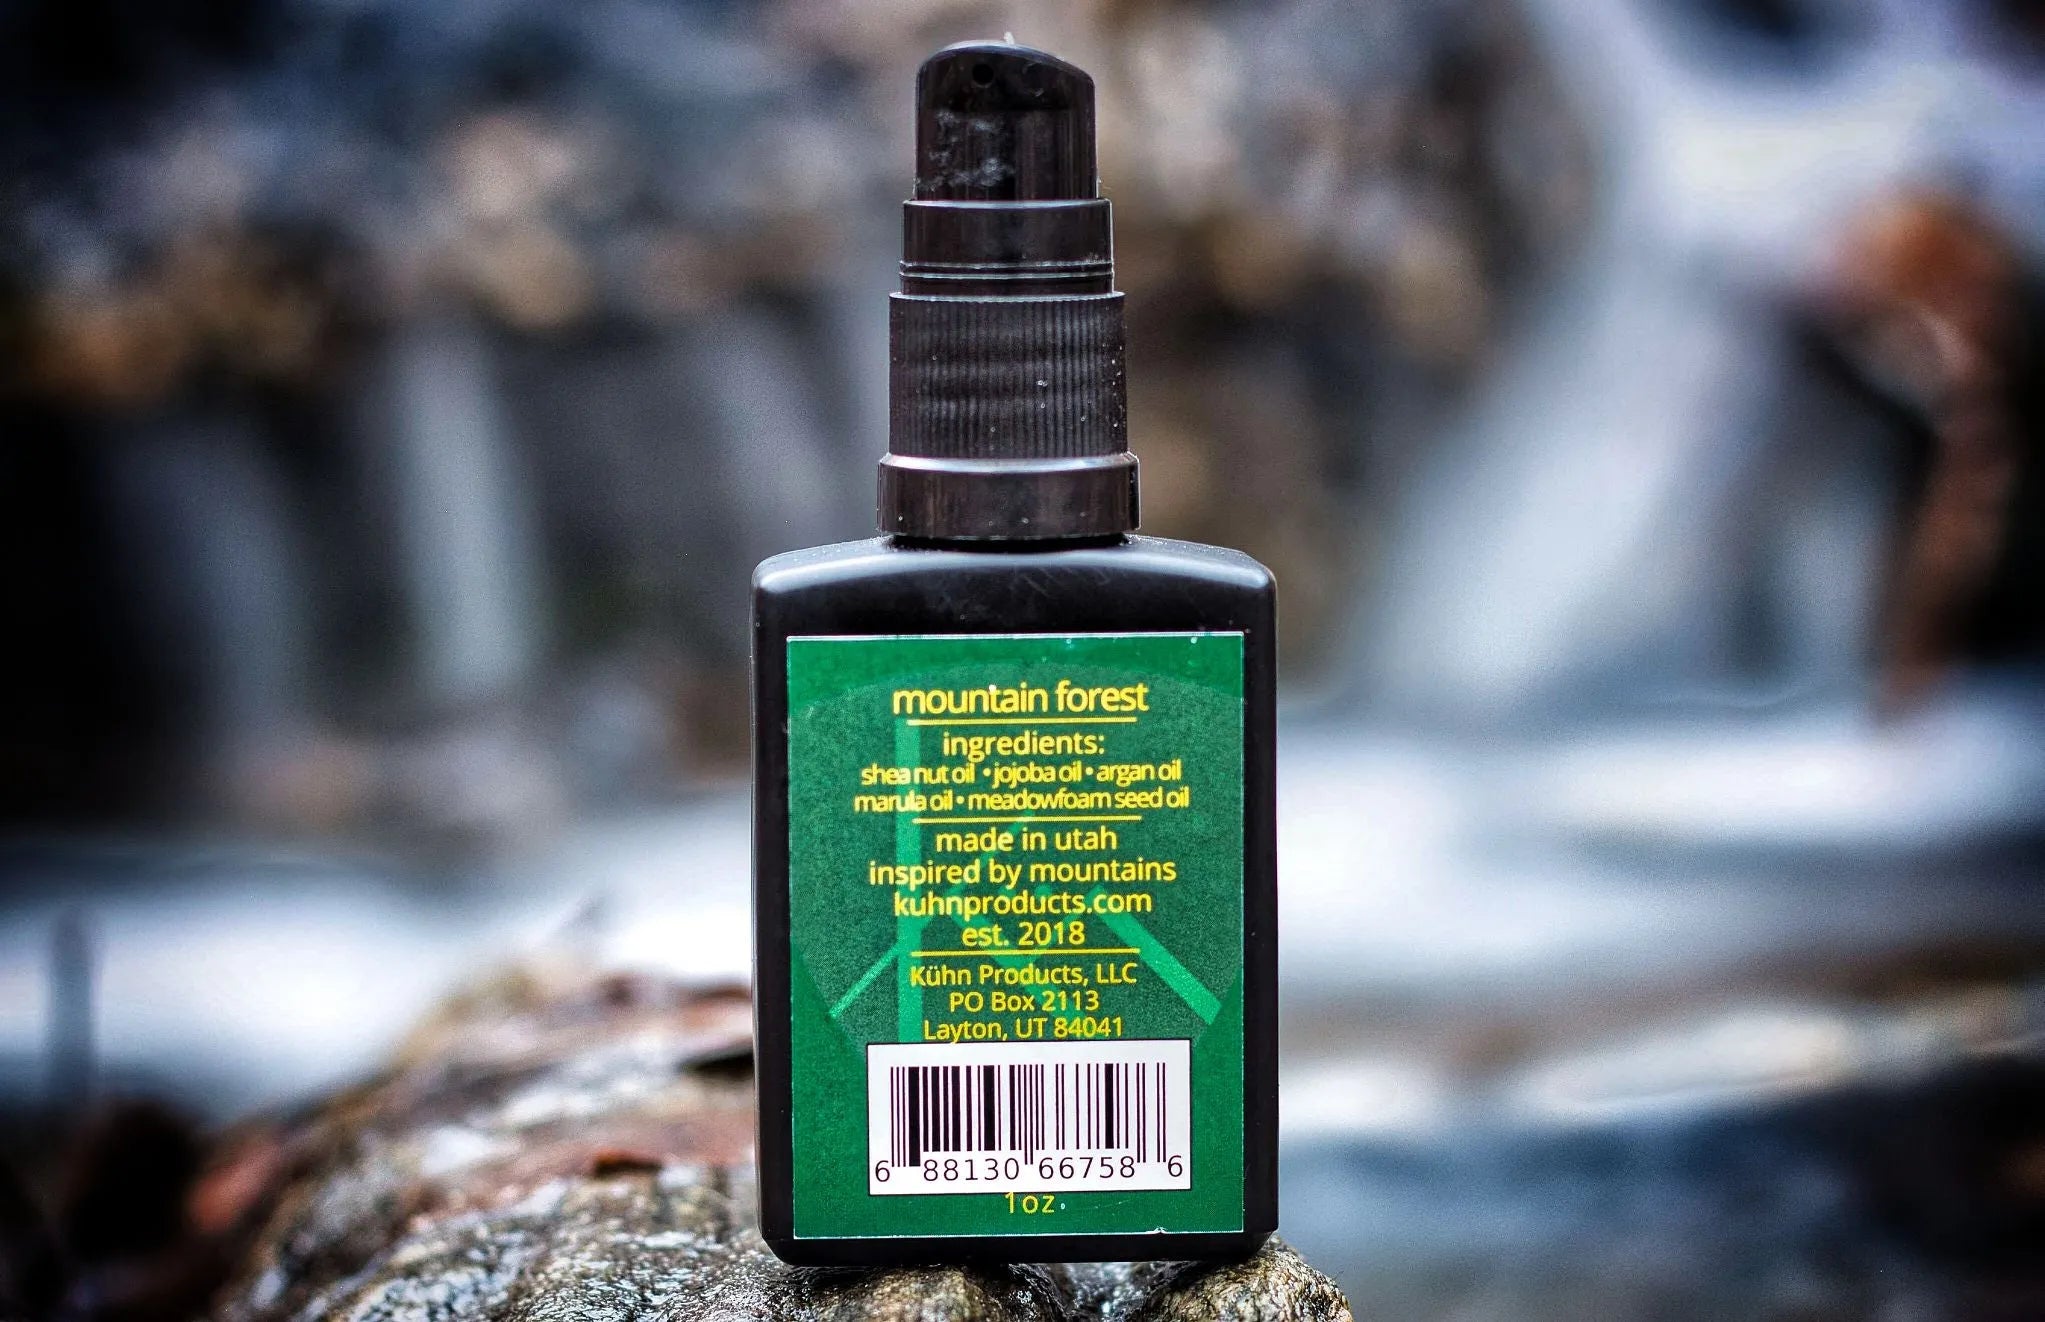 Mountain forest beard oil from kuhn products.